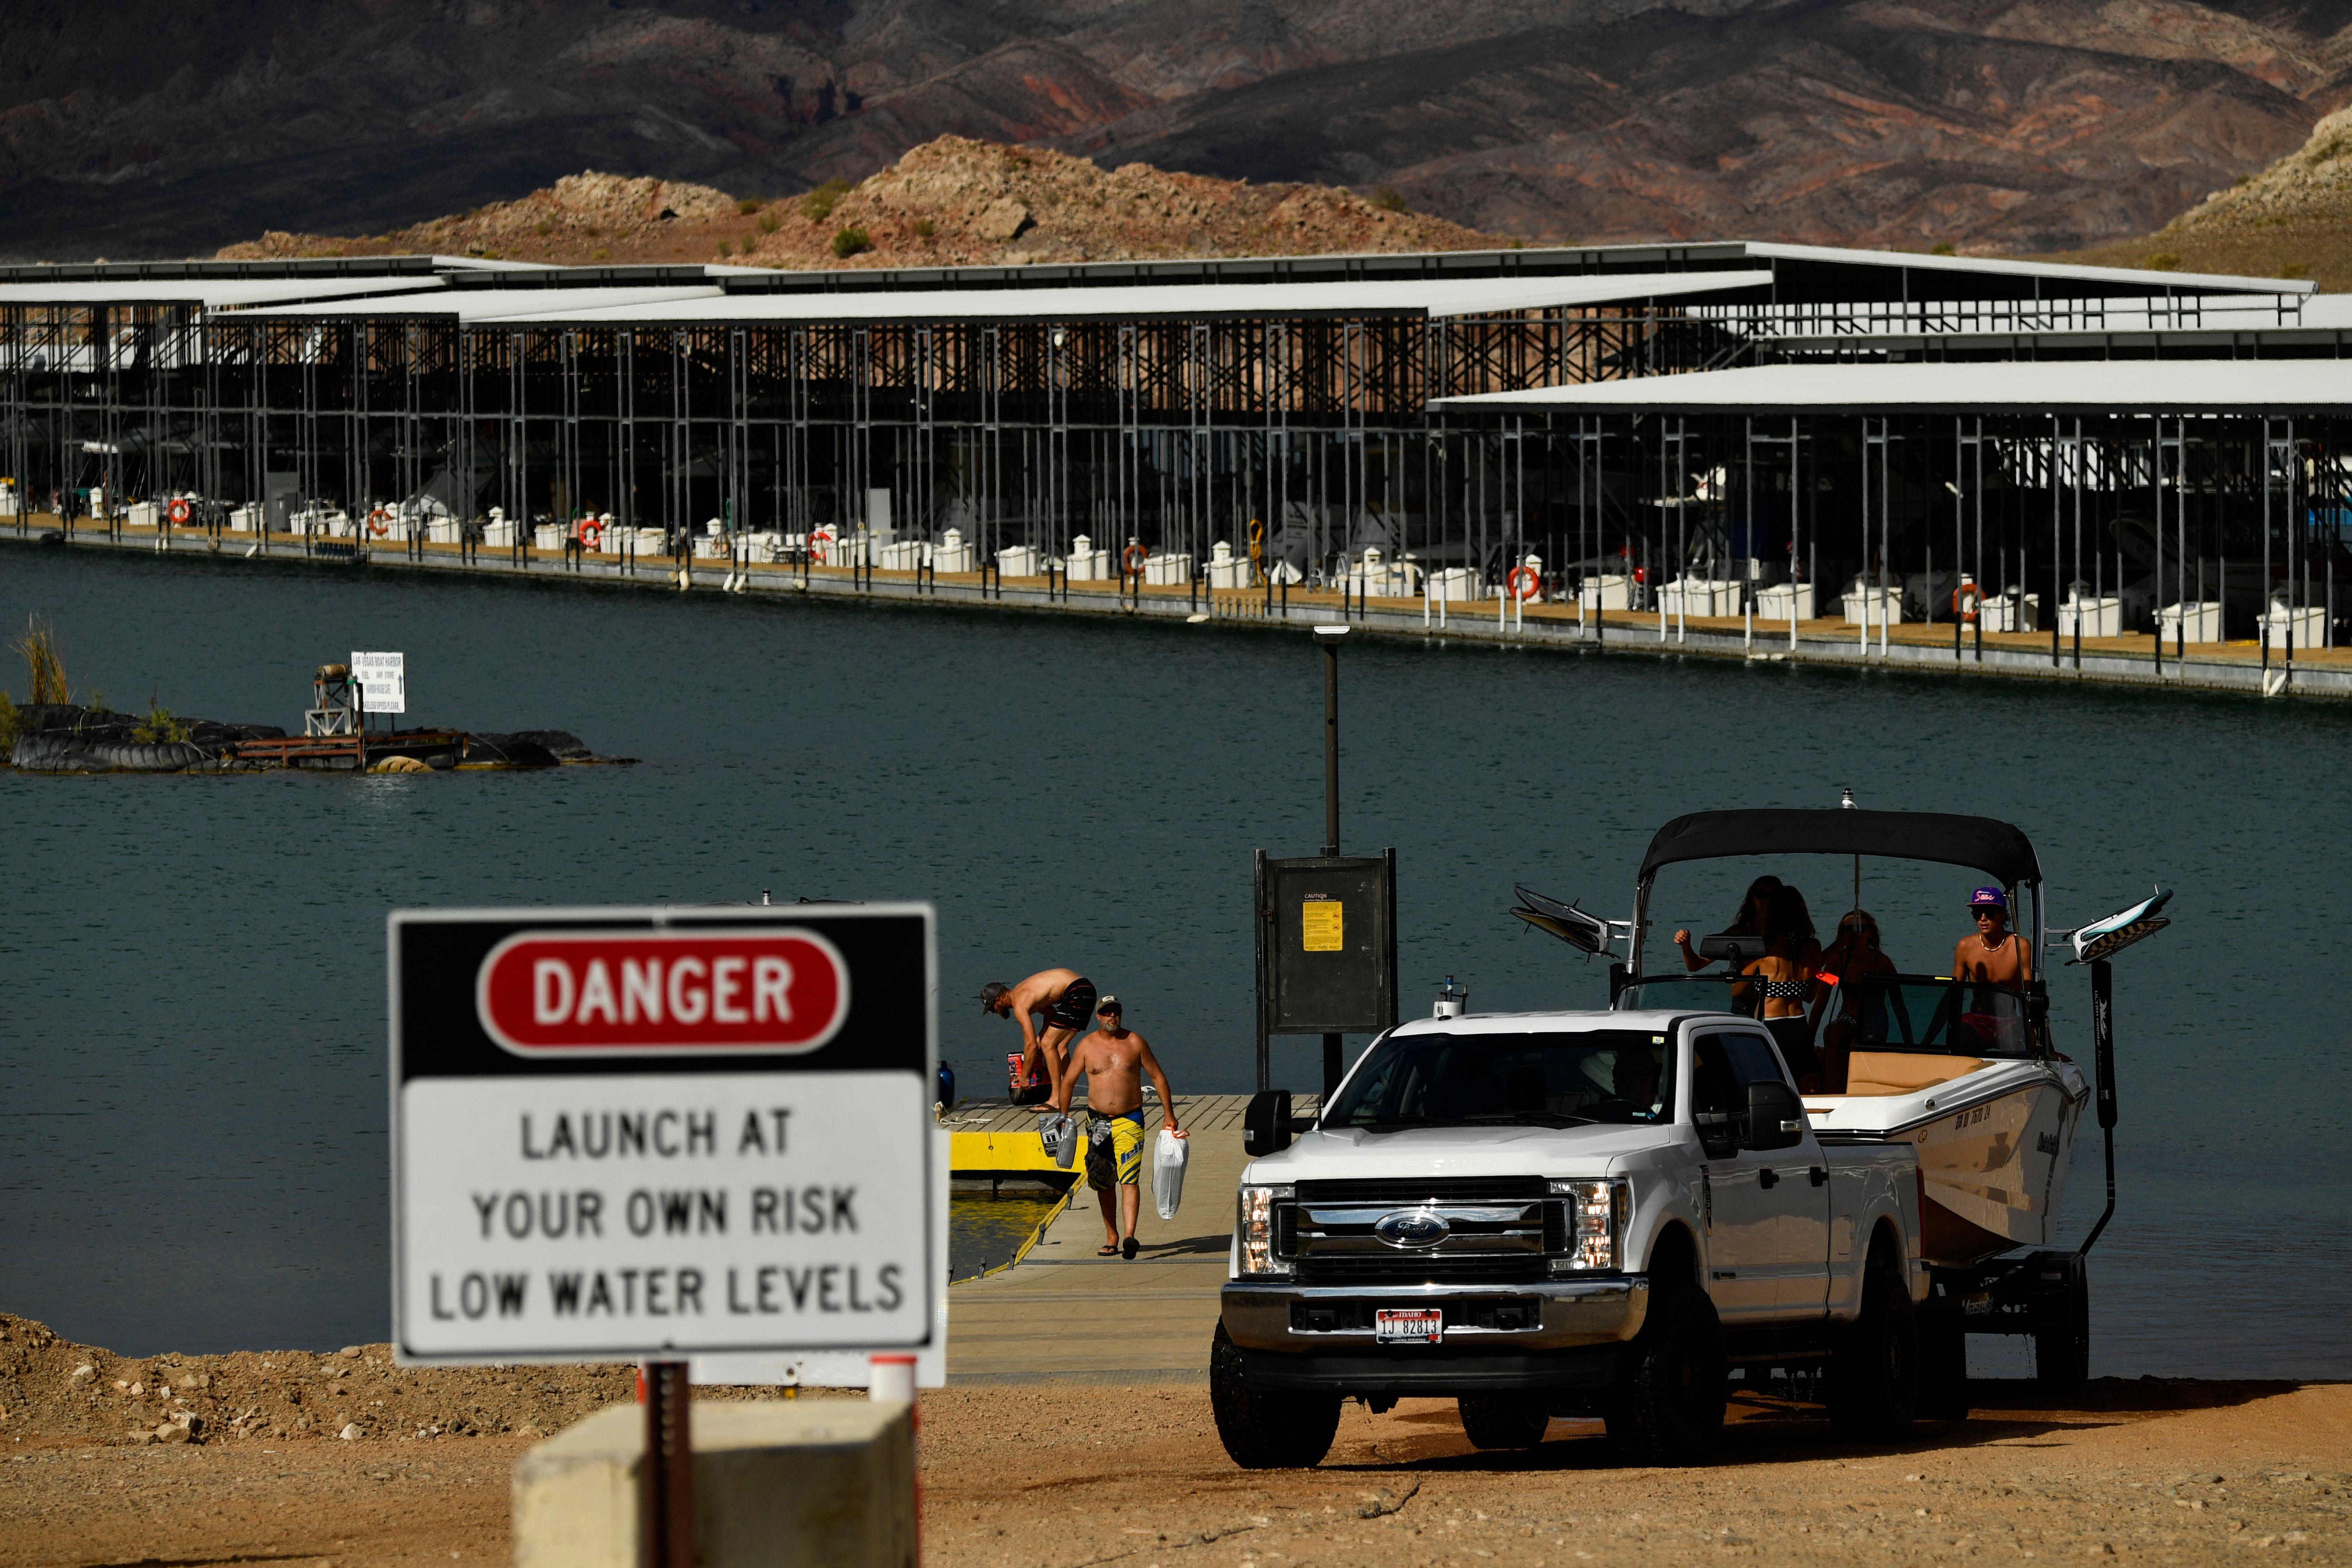 Visitors remove a boat from a boat ramp near a sign that says "DANGER. Launch at Your Own Risk. Low Water Levels."